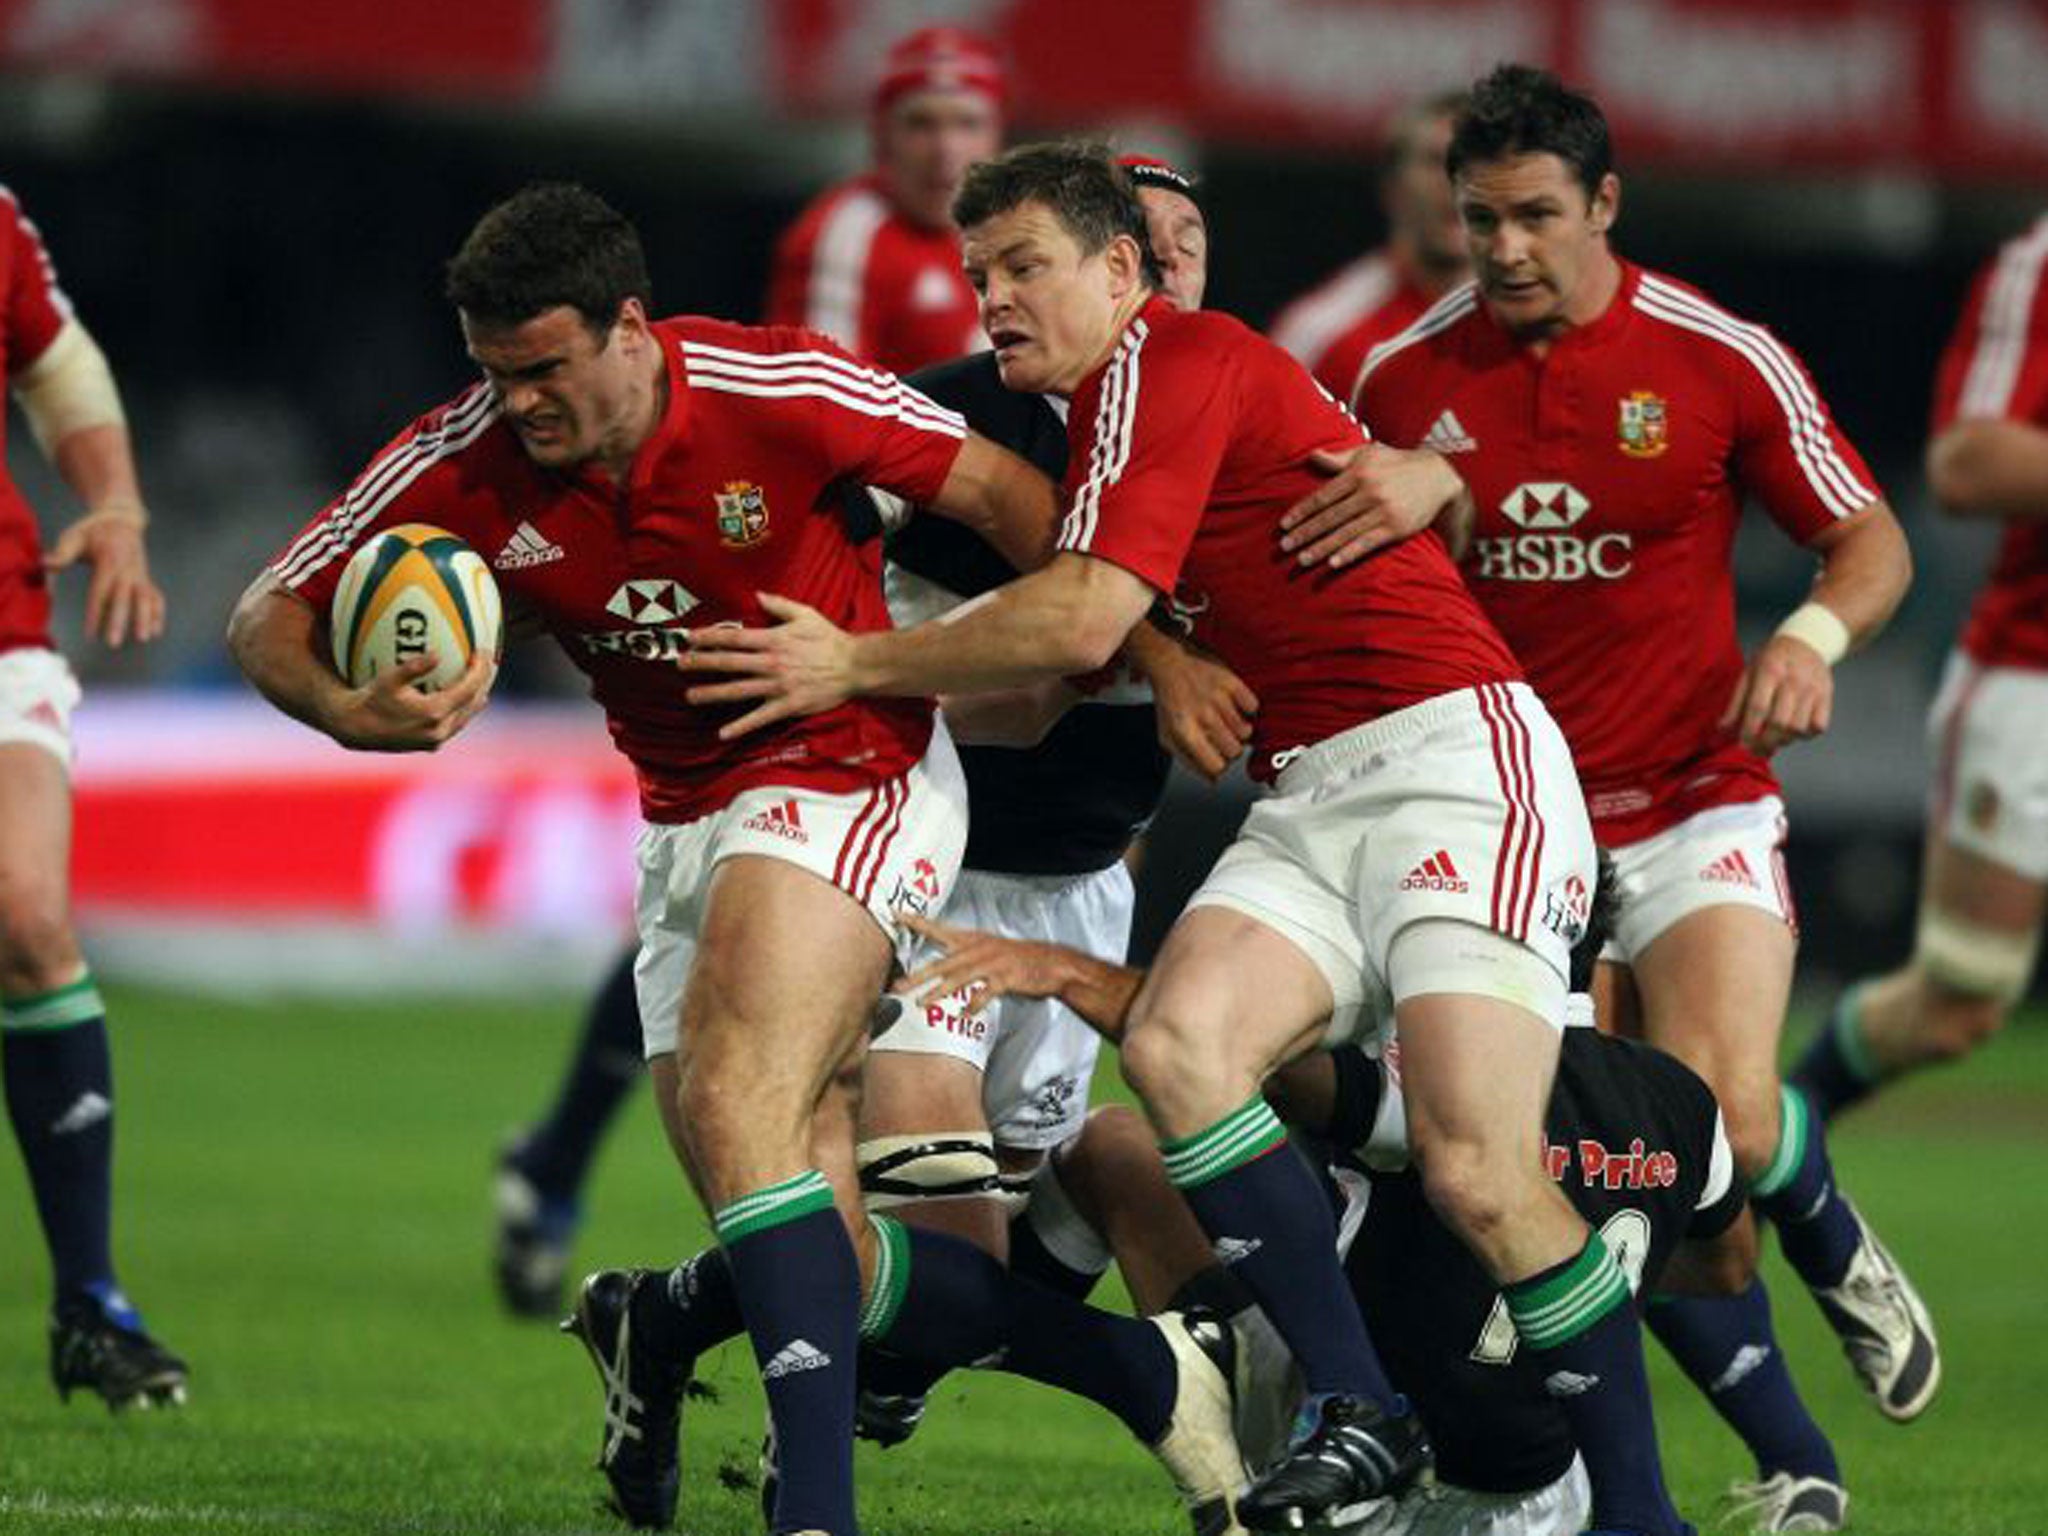 Charging upfield with Brian O’Driscoll in support on the 2009 Lions tour of South Africa